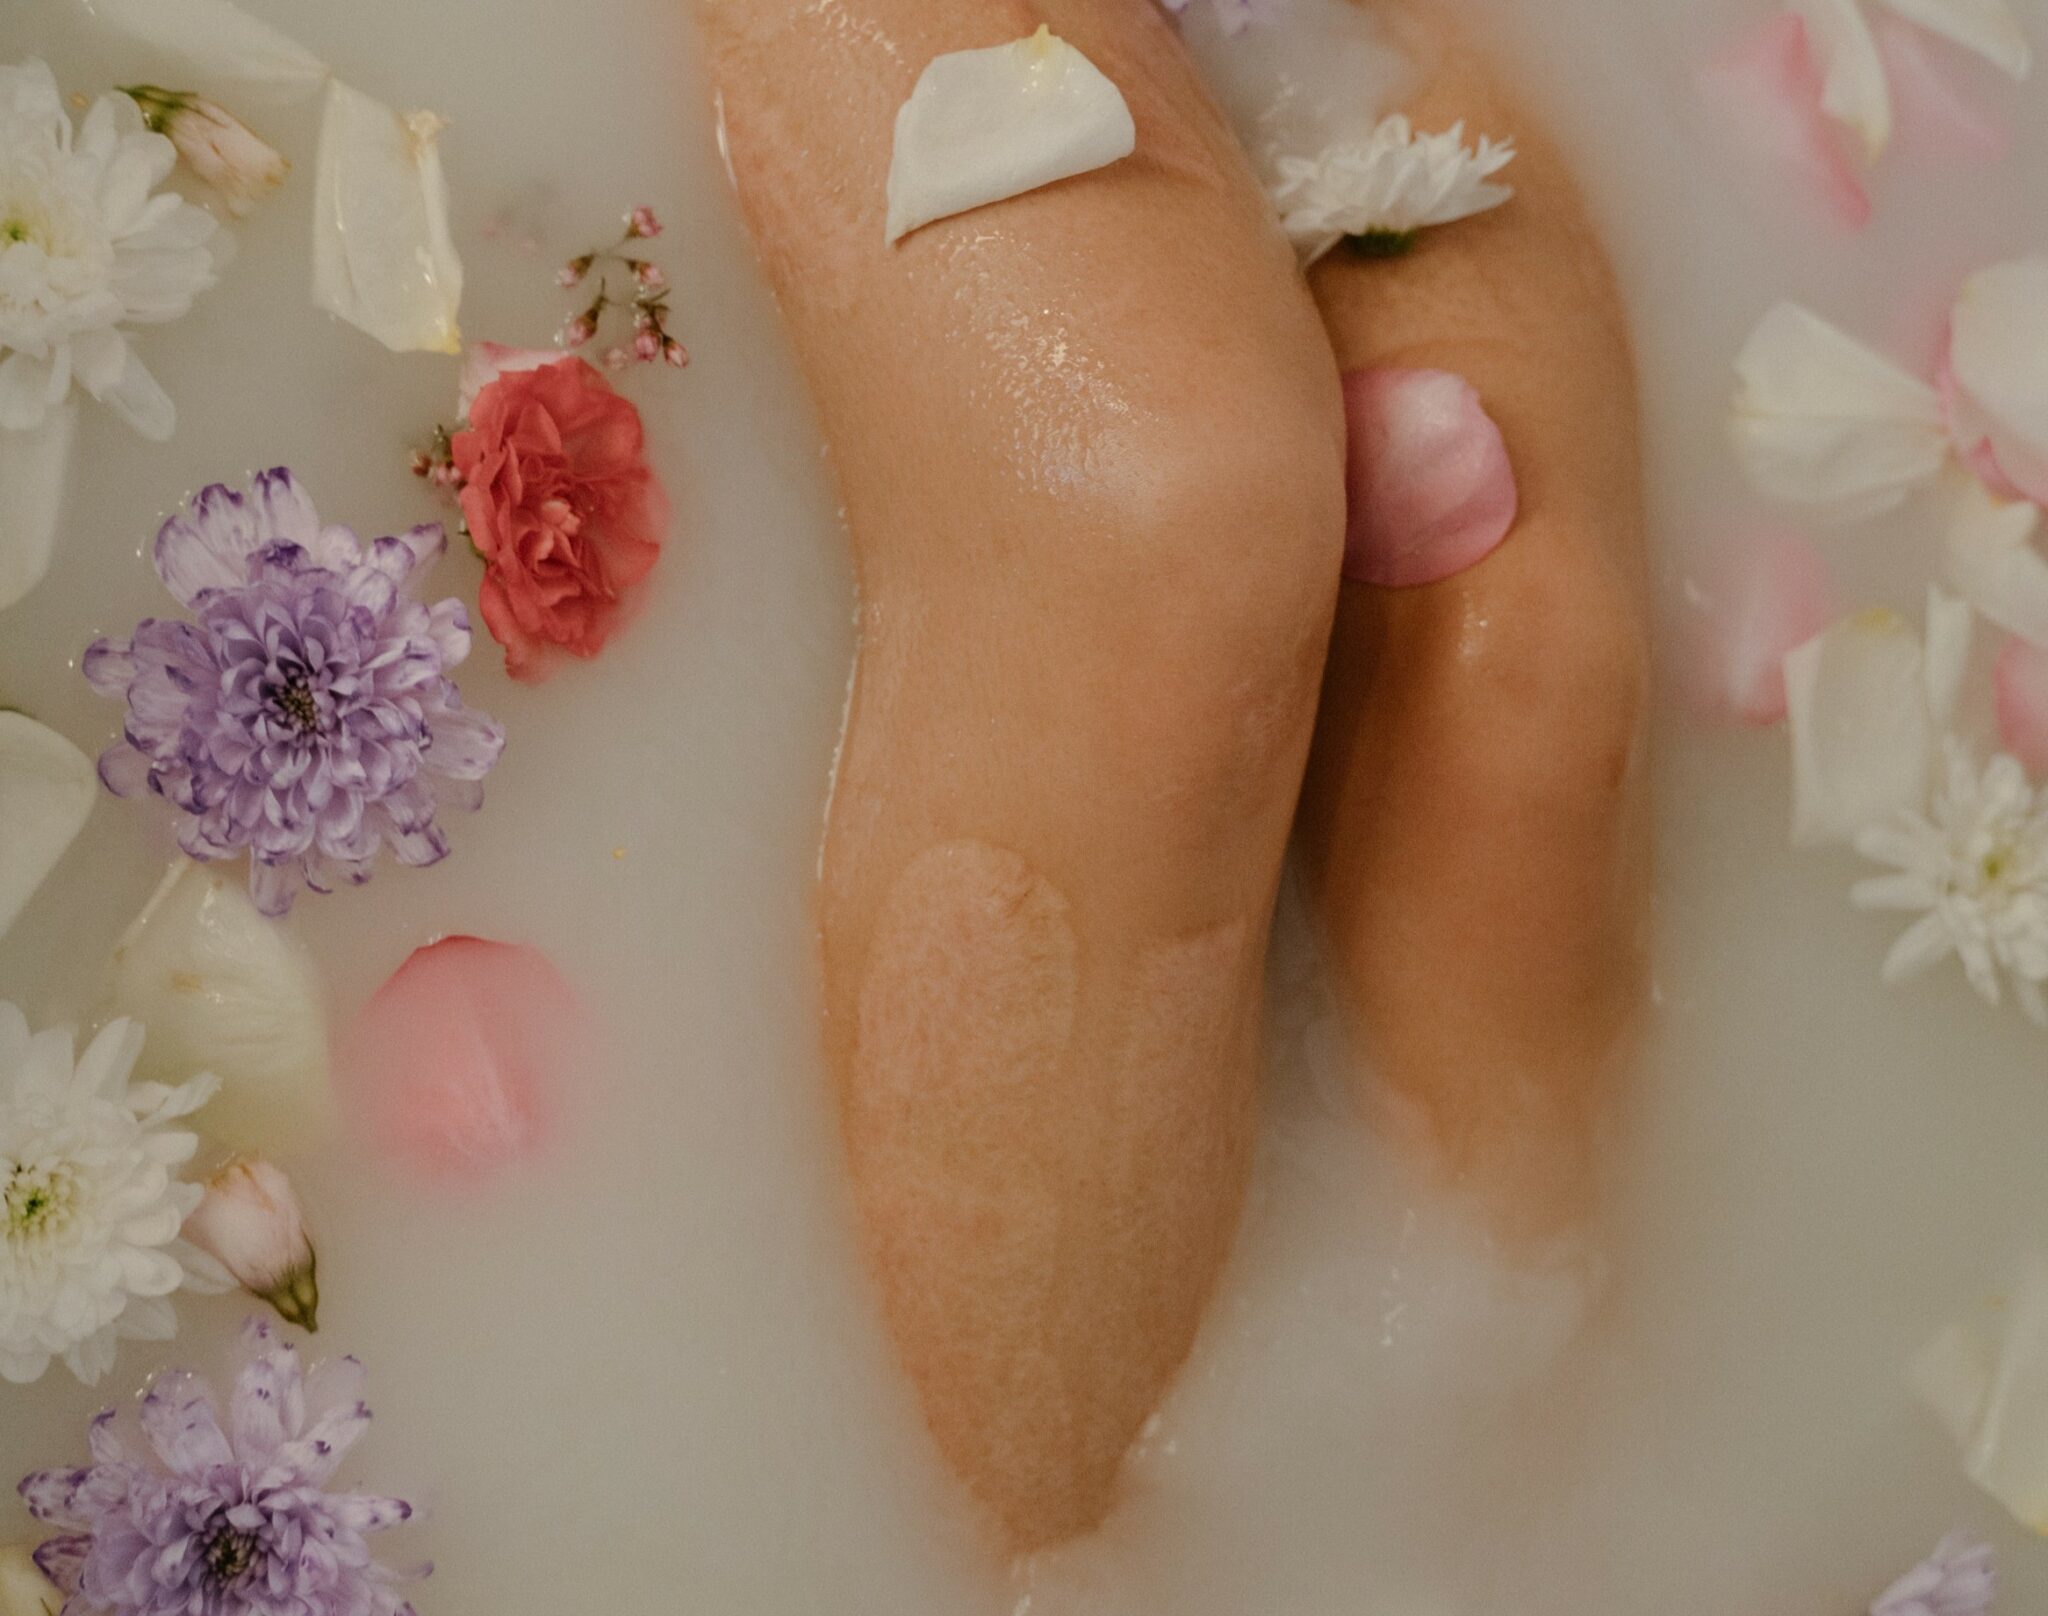 Legs stretched out in a milky bath filled with flowers.